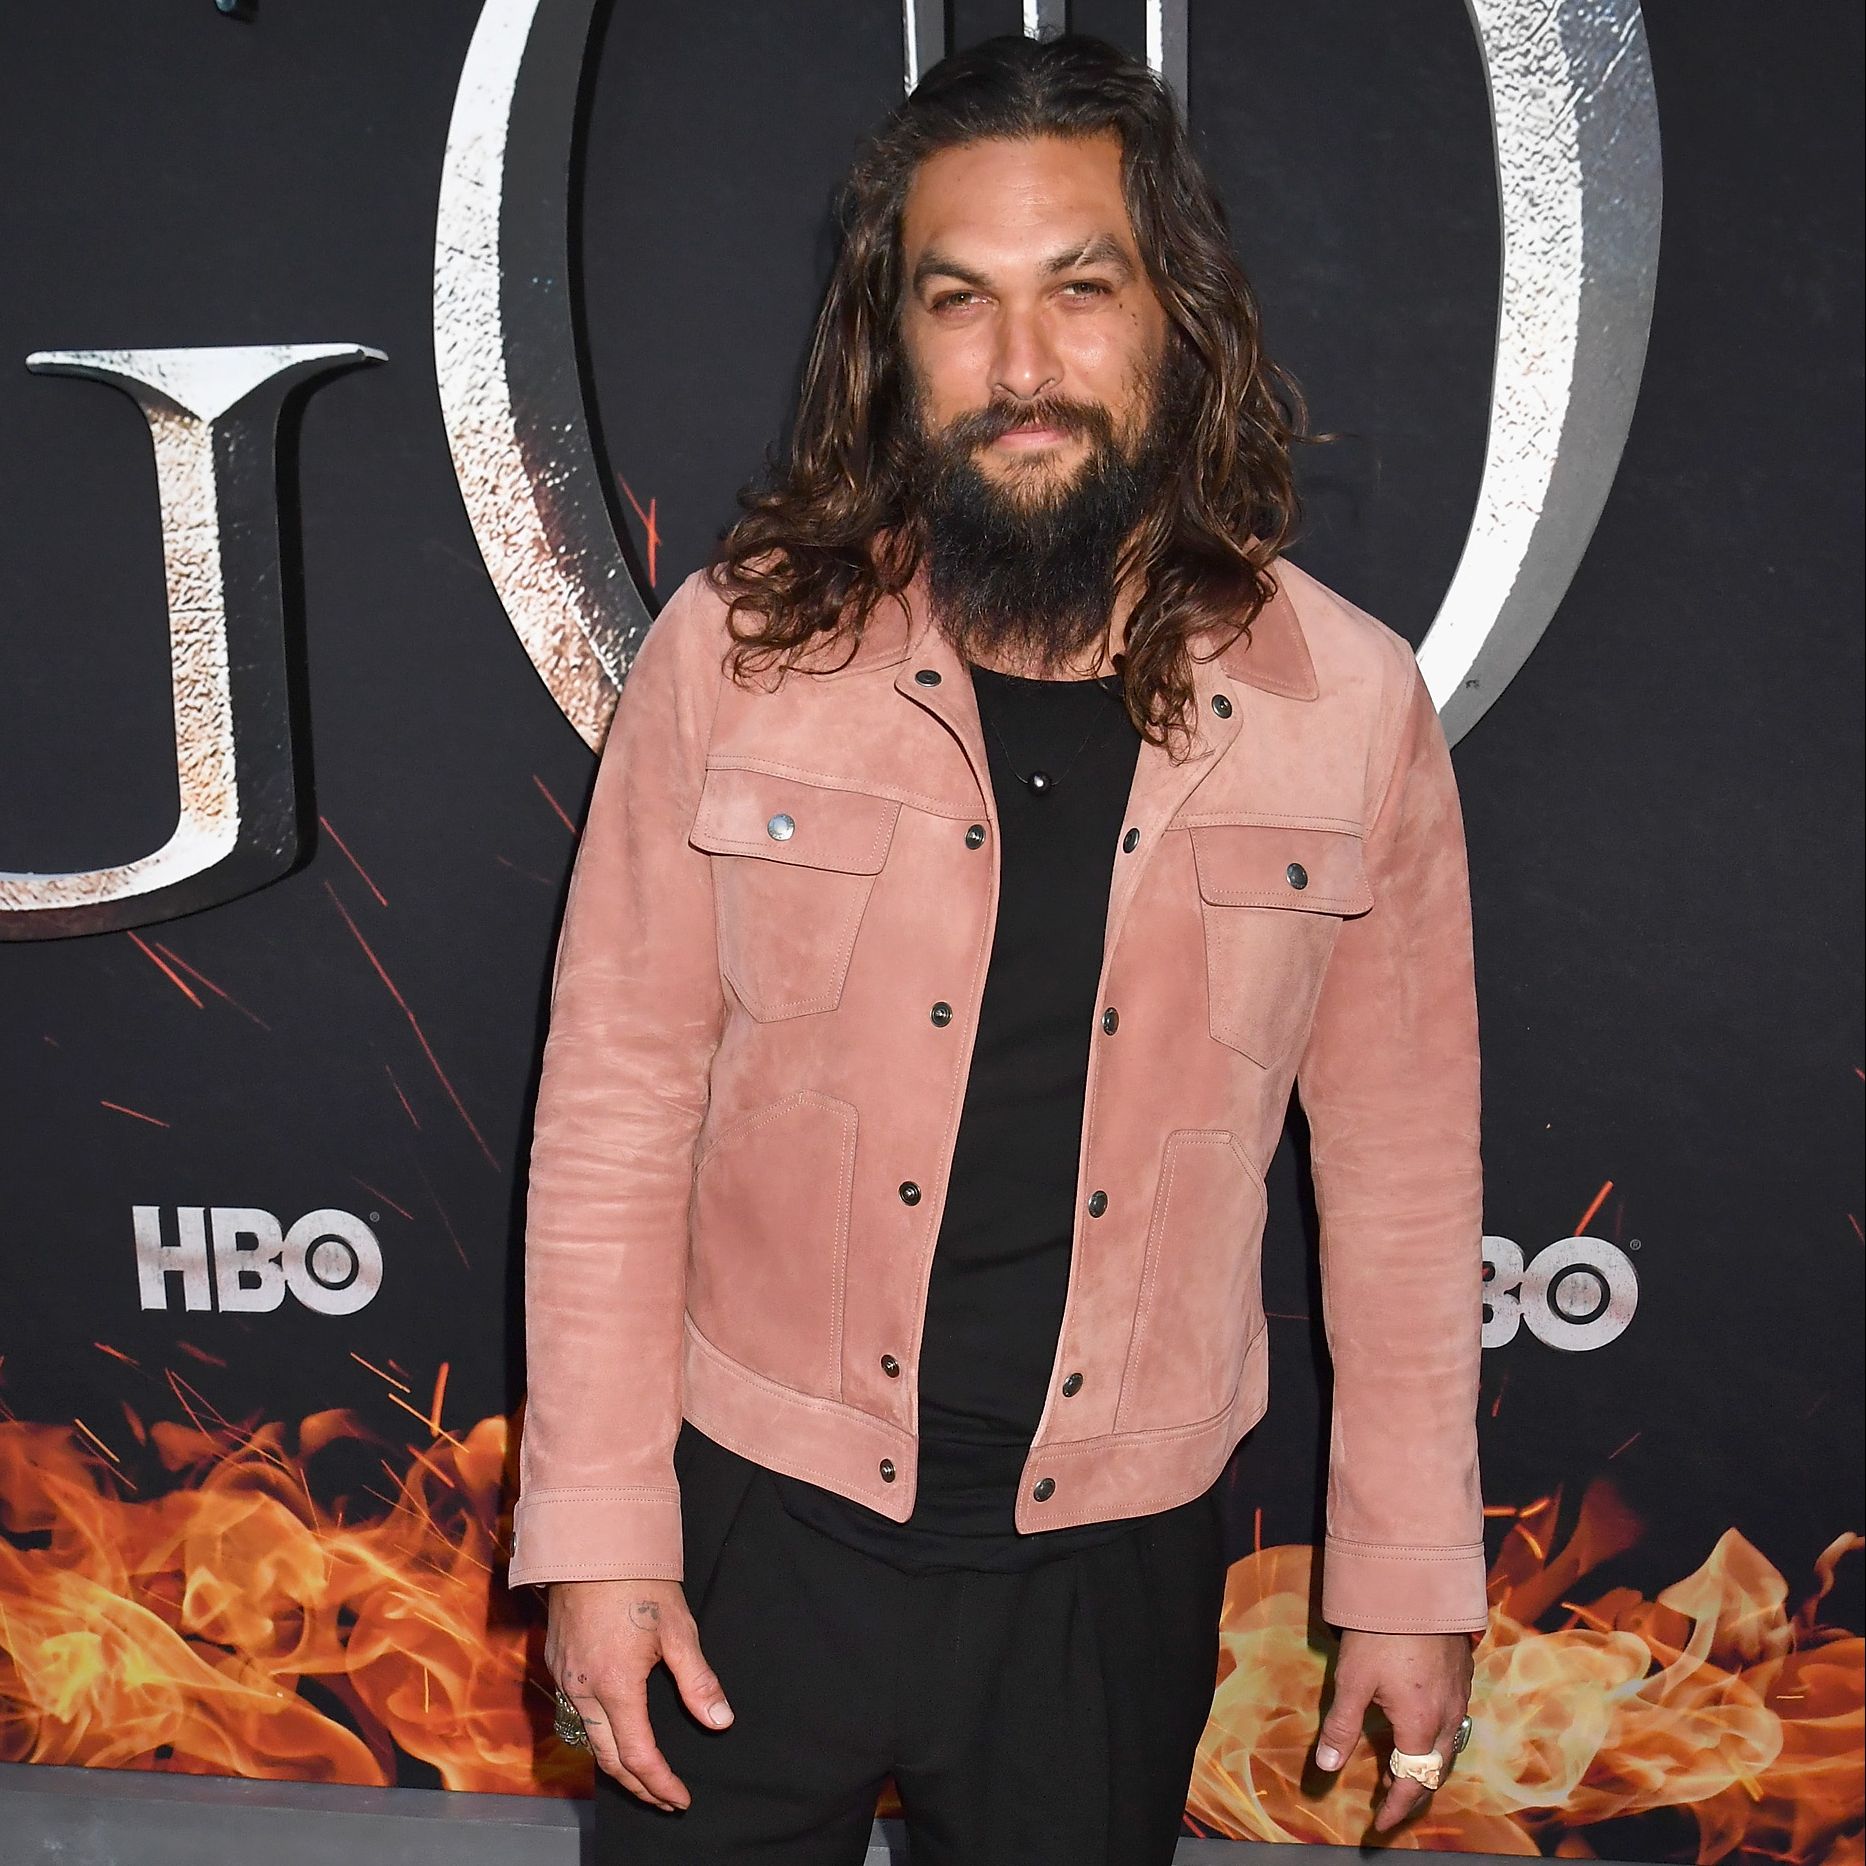 jason momoa’s behind the scenes game of thrones photo from when he was too broke to fly home